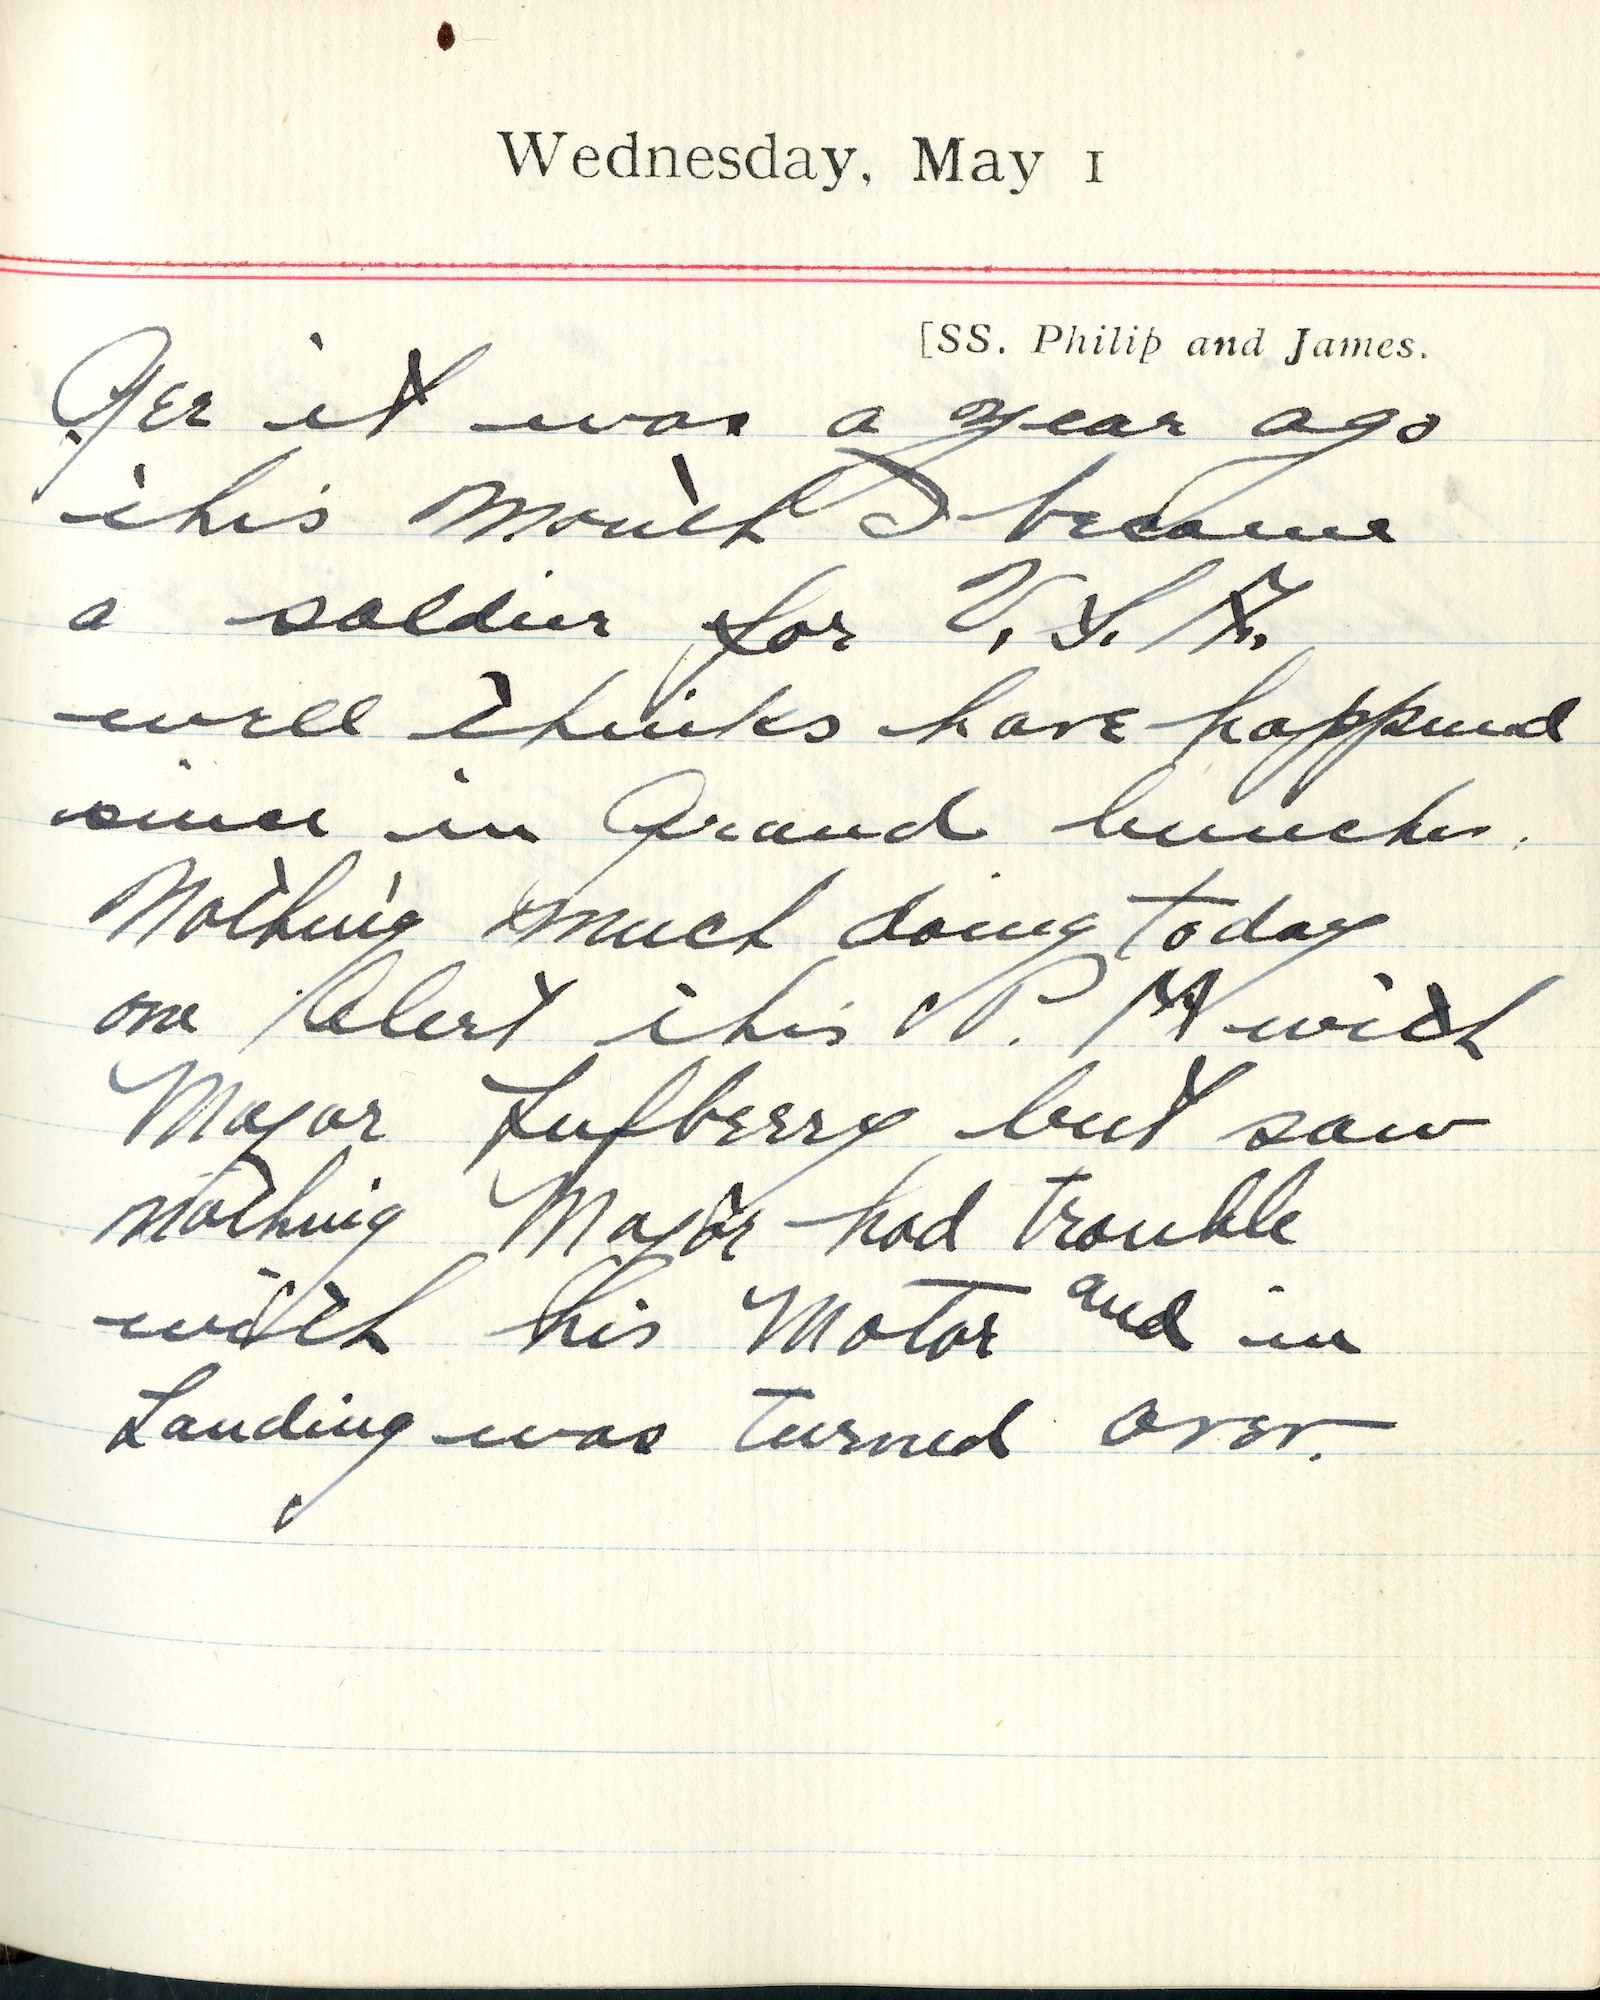 Capt. Edward V. Rickenbacker's 1918 wartime diary entry. (05/01/1918) Gee, it was a year ago this month I became a soldier for U.S.A.  Well, things have happened since in grand bunches.

Nothing much doing today.  One alert this P.M. with Major Lufbery but saw nothing.  Major had trouble with his motor and in landing, was turned over.